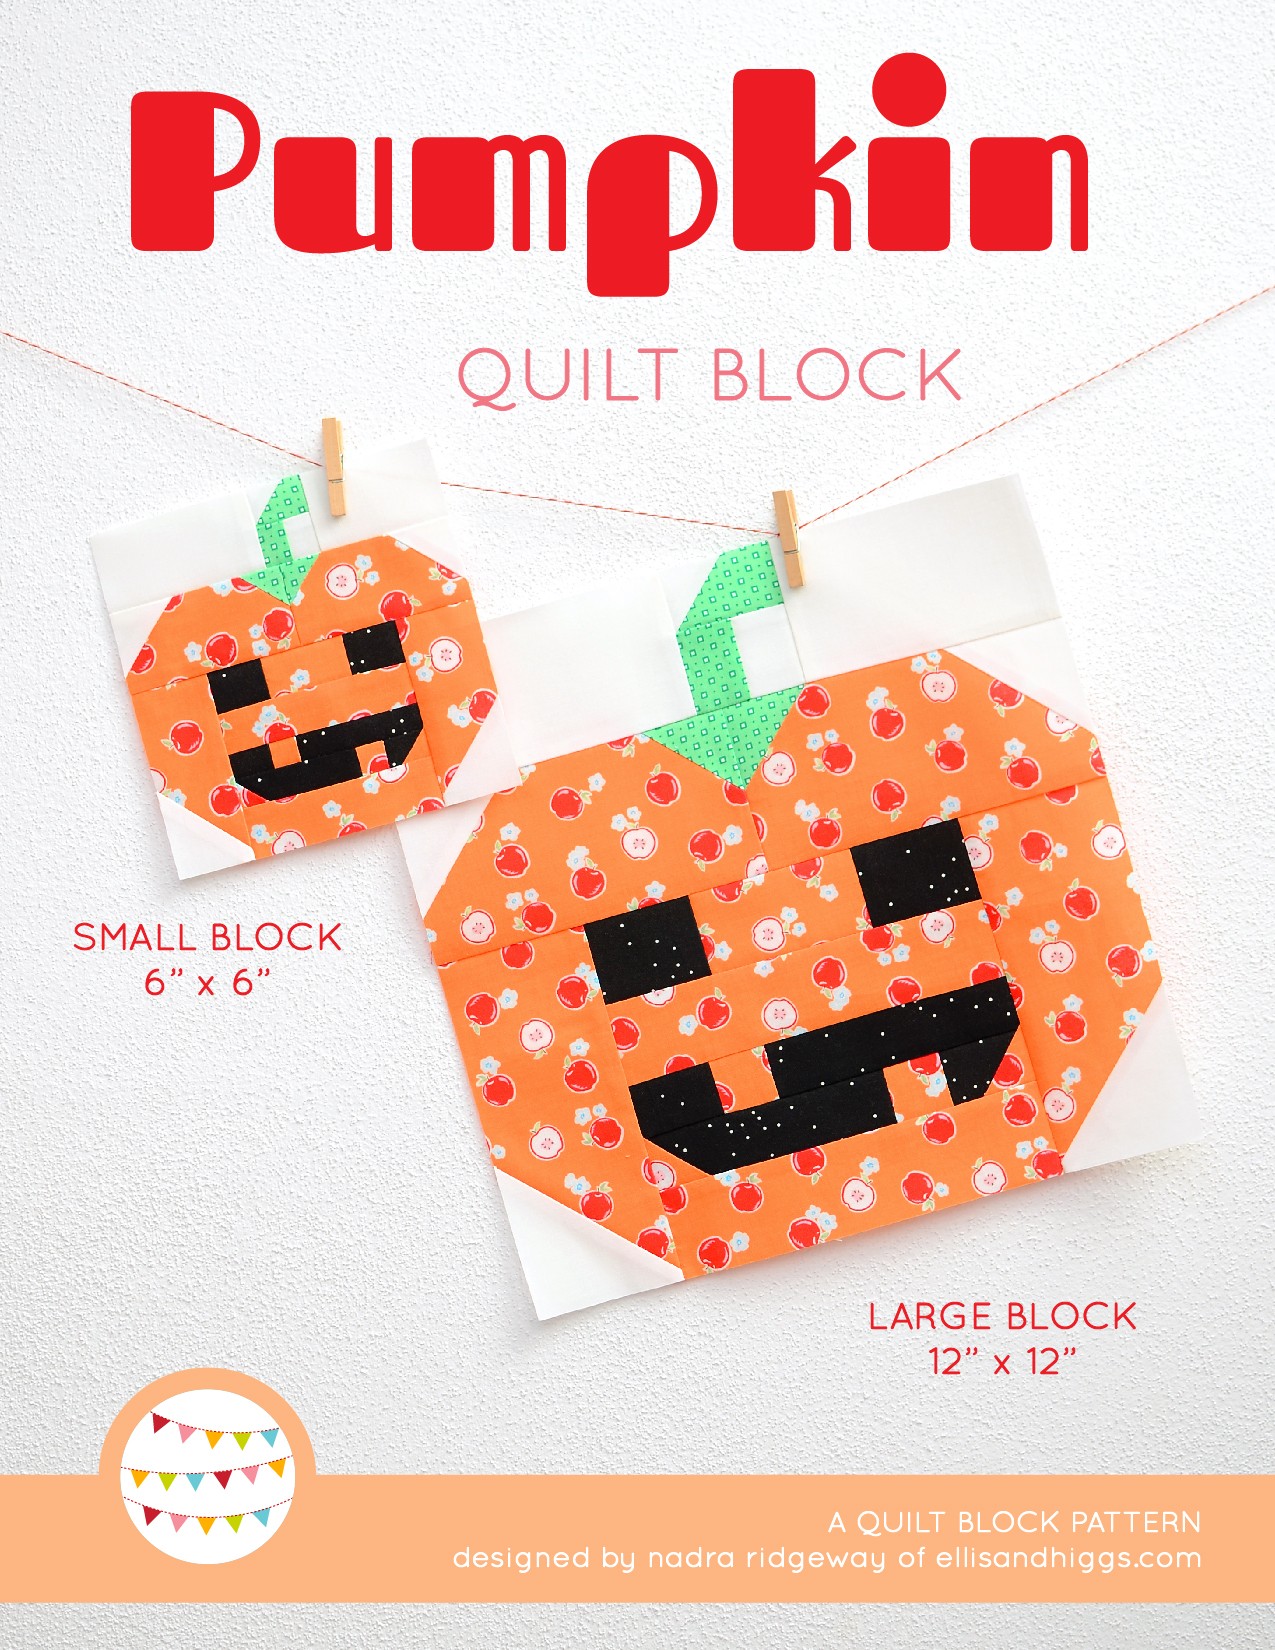 Pumpkin quilt block in two sizes hanging on a wall